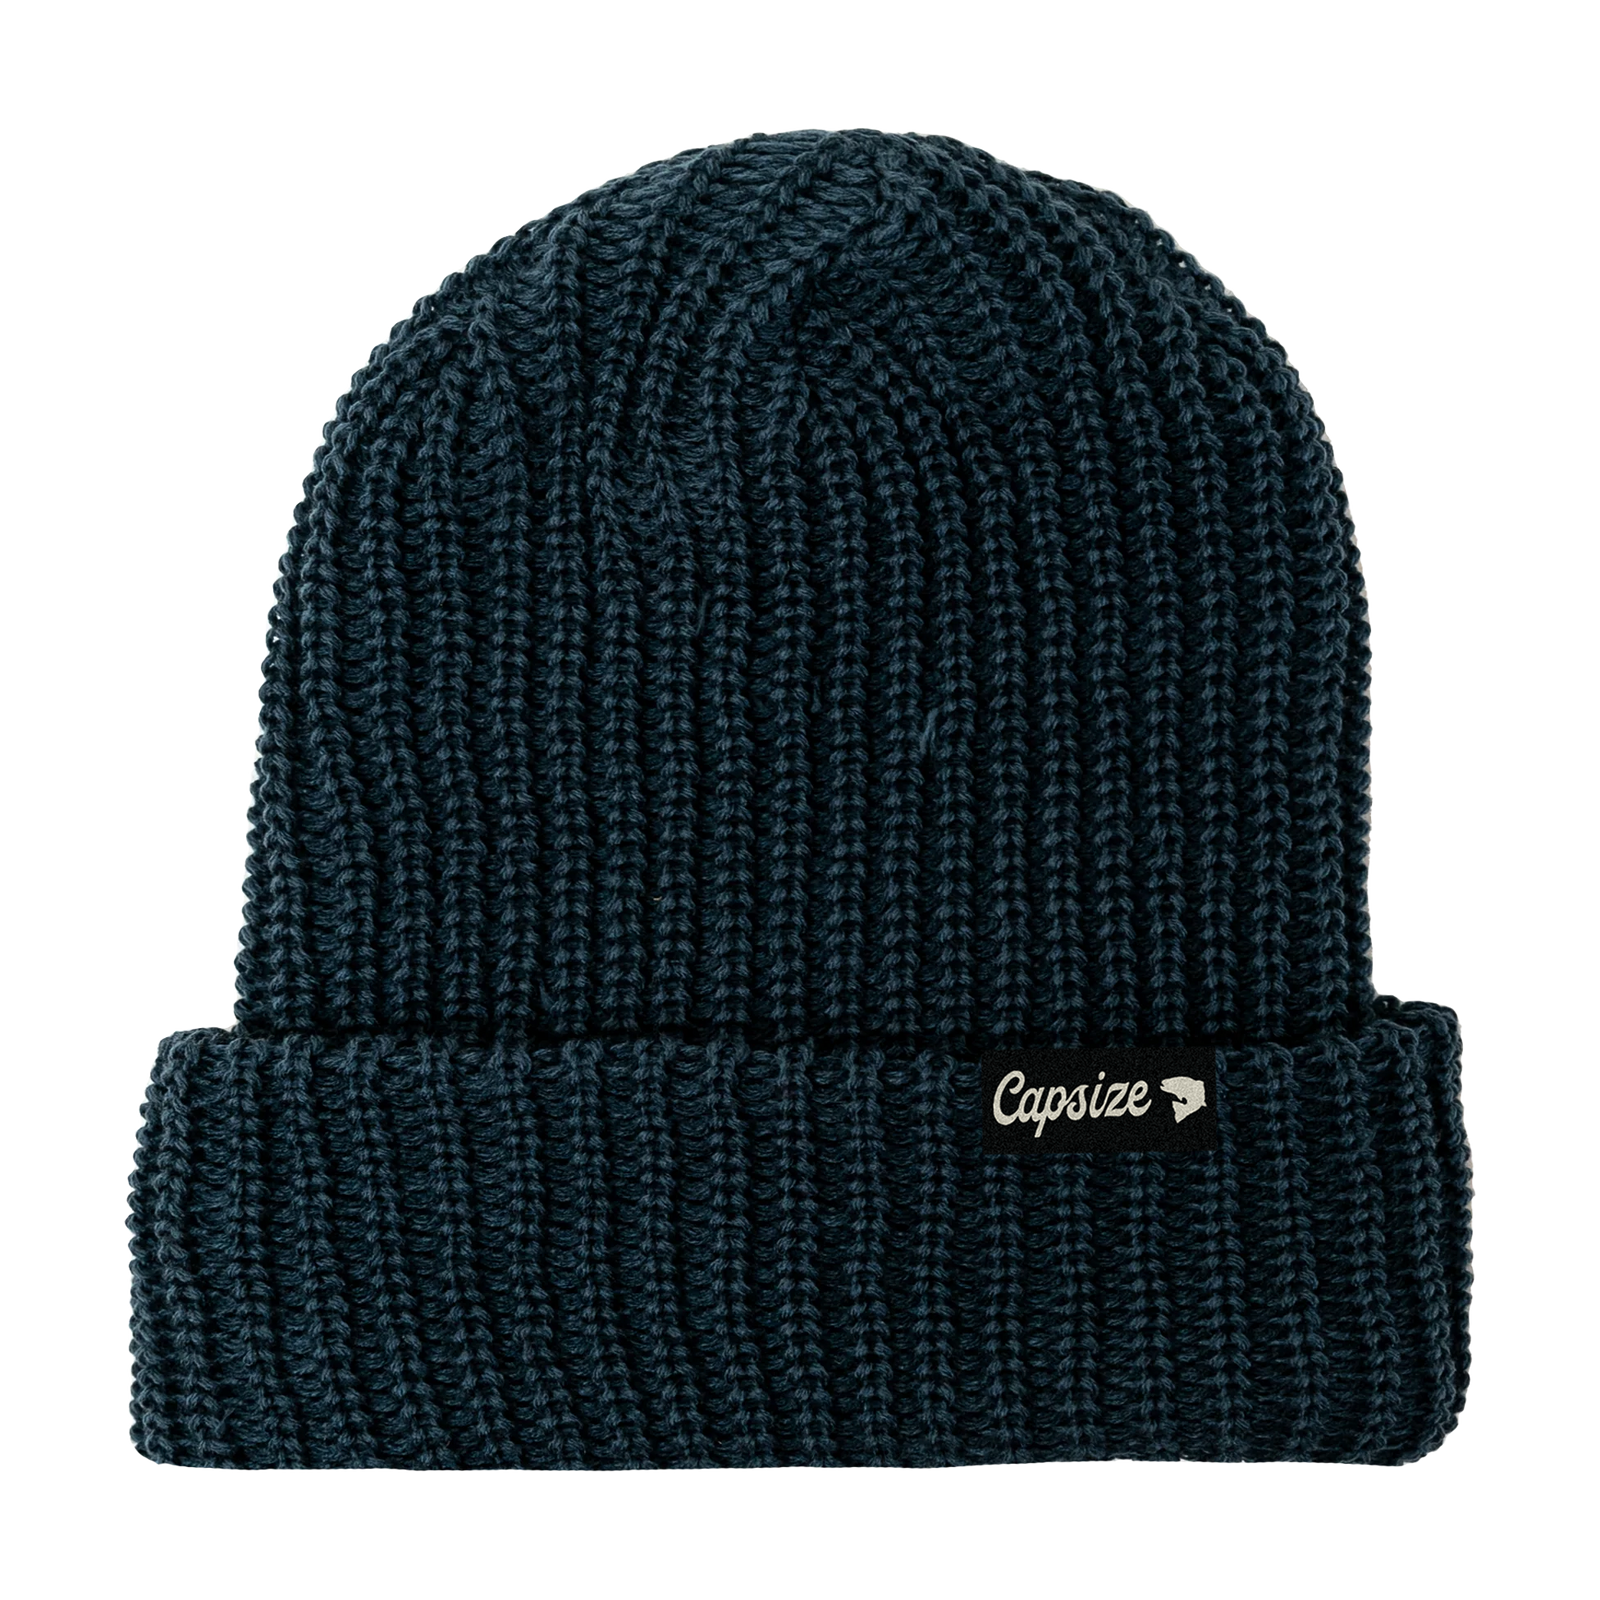 Fly Fishing Beanie | Mountain Eclipse Beanie - Capsize Fly Fishing